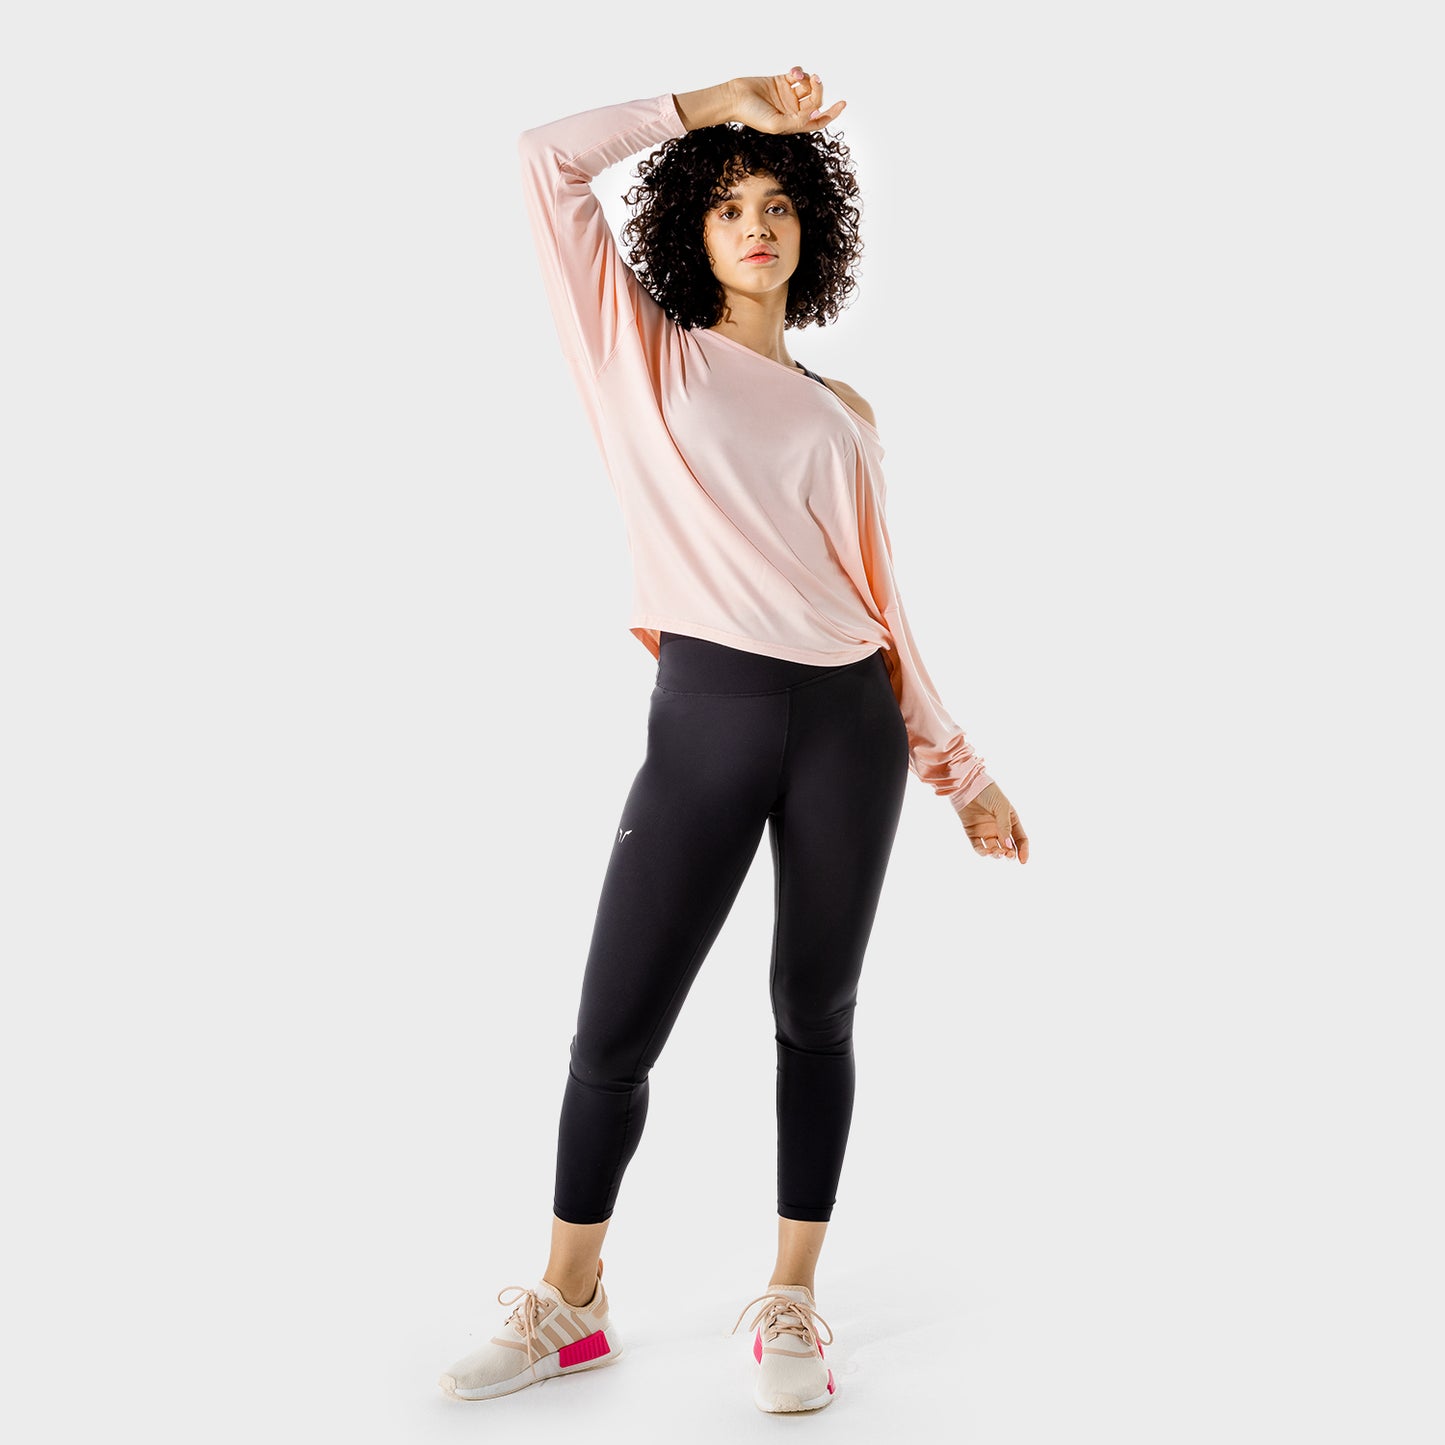 squatwolf-gym-wear-womens-fitness-batwing-top-peach-workout-shirts